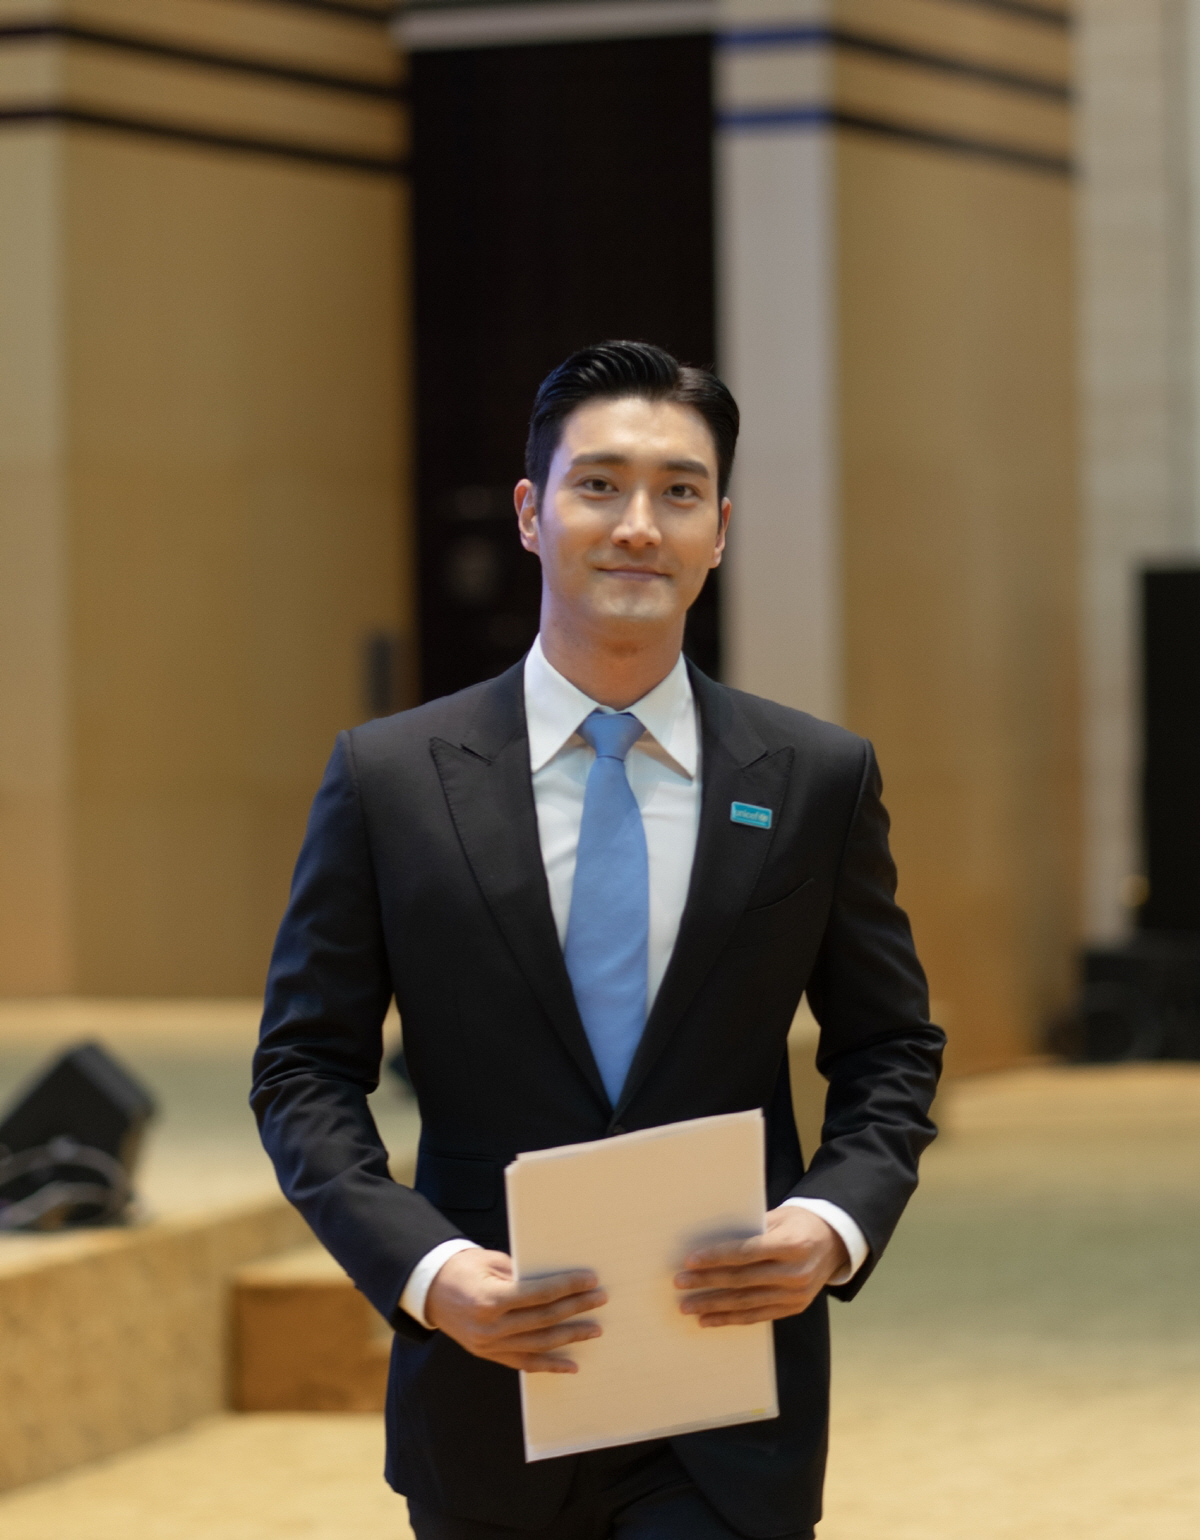 Choi Choi Siwon was appointed as a goodwill ambassador for the UNICEF East AsiaPacific Ocean region for the first time in Korea.Choi Choi Siwon was at the Laos Generation 2030 Forum in Vientiane in Laos Vientiane on the 11th (local time) to mark the 30th anniversary of the adoption of the UNChild Rights Convention, the UNICEF East Asia Pacific Ocean Regional Friendship Ambassador (UNICEF Regional Agional Agency) He was appointed to the mbassador for East Asia Pacific Regional and focused attention around the world.Choi Siwon was the first Korean artist to become a goodwill ambassador to the East AsiaPacific Ocean region of UNICEF, and Choi Siwon was recognized for his high popularity and influence in the East AsiaPacific Ocean region as well as his authenticity in promoting Child rights since 2010.Choi Choi Siwon said: I am very pleased to be appointed as a regional goodwill ambassador for East AsiaPacific Ocean.In the meantime, I felt a sense of mission by visiting various countries and having a special experience of meeting children and their families directly.I will do my best to help children in the East AsiaPacific Ocean area in the future. Choi Choi Siwon has been participating in various UNICEF campaigns since 2010 through steady talent donations. In November 2015, he was selected as a special representative of UNICEF Korea Committee. He has visited UNICEF offices in East Asia Pacific Ocean countries such as Malaysia, Thailand and Vietnam as well as Korea, and has actively promoted Child rights.In particular, last year, he attended the opening ceremony of the 5th ASEAN Childrens Forum (ACF) as a keynote speaker, appealed for interest in Child Human Rights, led discussions at discussion sessions of delegations from 10 Southeast Asian countries, and also appeared on the Thailand local fundraising show The Blue Carpet Show to take the lead for Child Rights, including a successful fundraising of over $500,000.In the future, Choi Choi Siwon will continue to work on UNICEF East AsiaPacific Ocean Regional Friendship Ambassador, which focuses on protecting children in the online environment and strives for childrens rights such as health, education and equality.